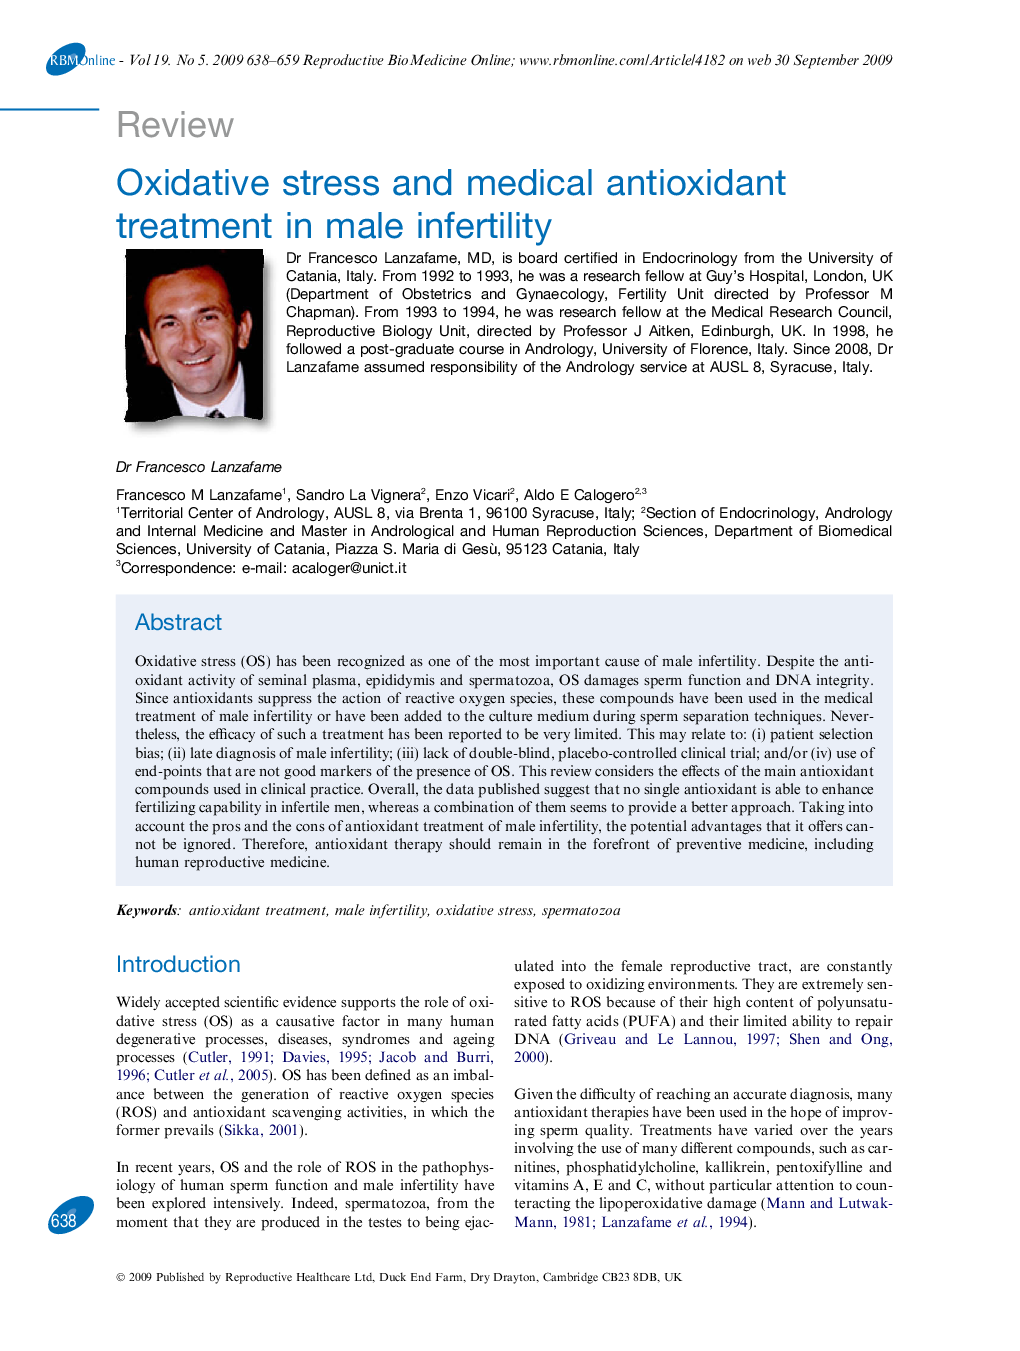 Oxidative stress and medical antioxidant treatment in male infertility 